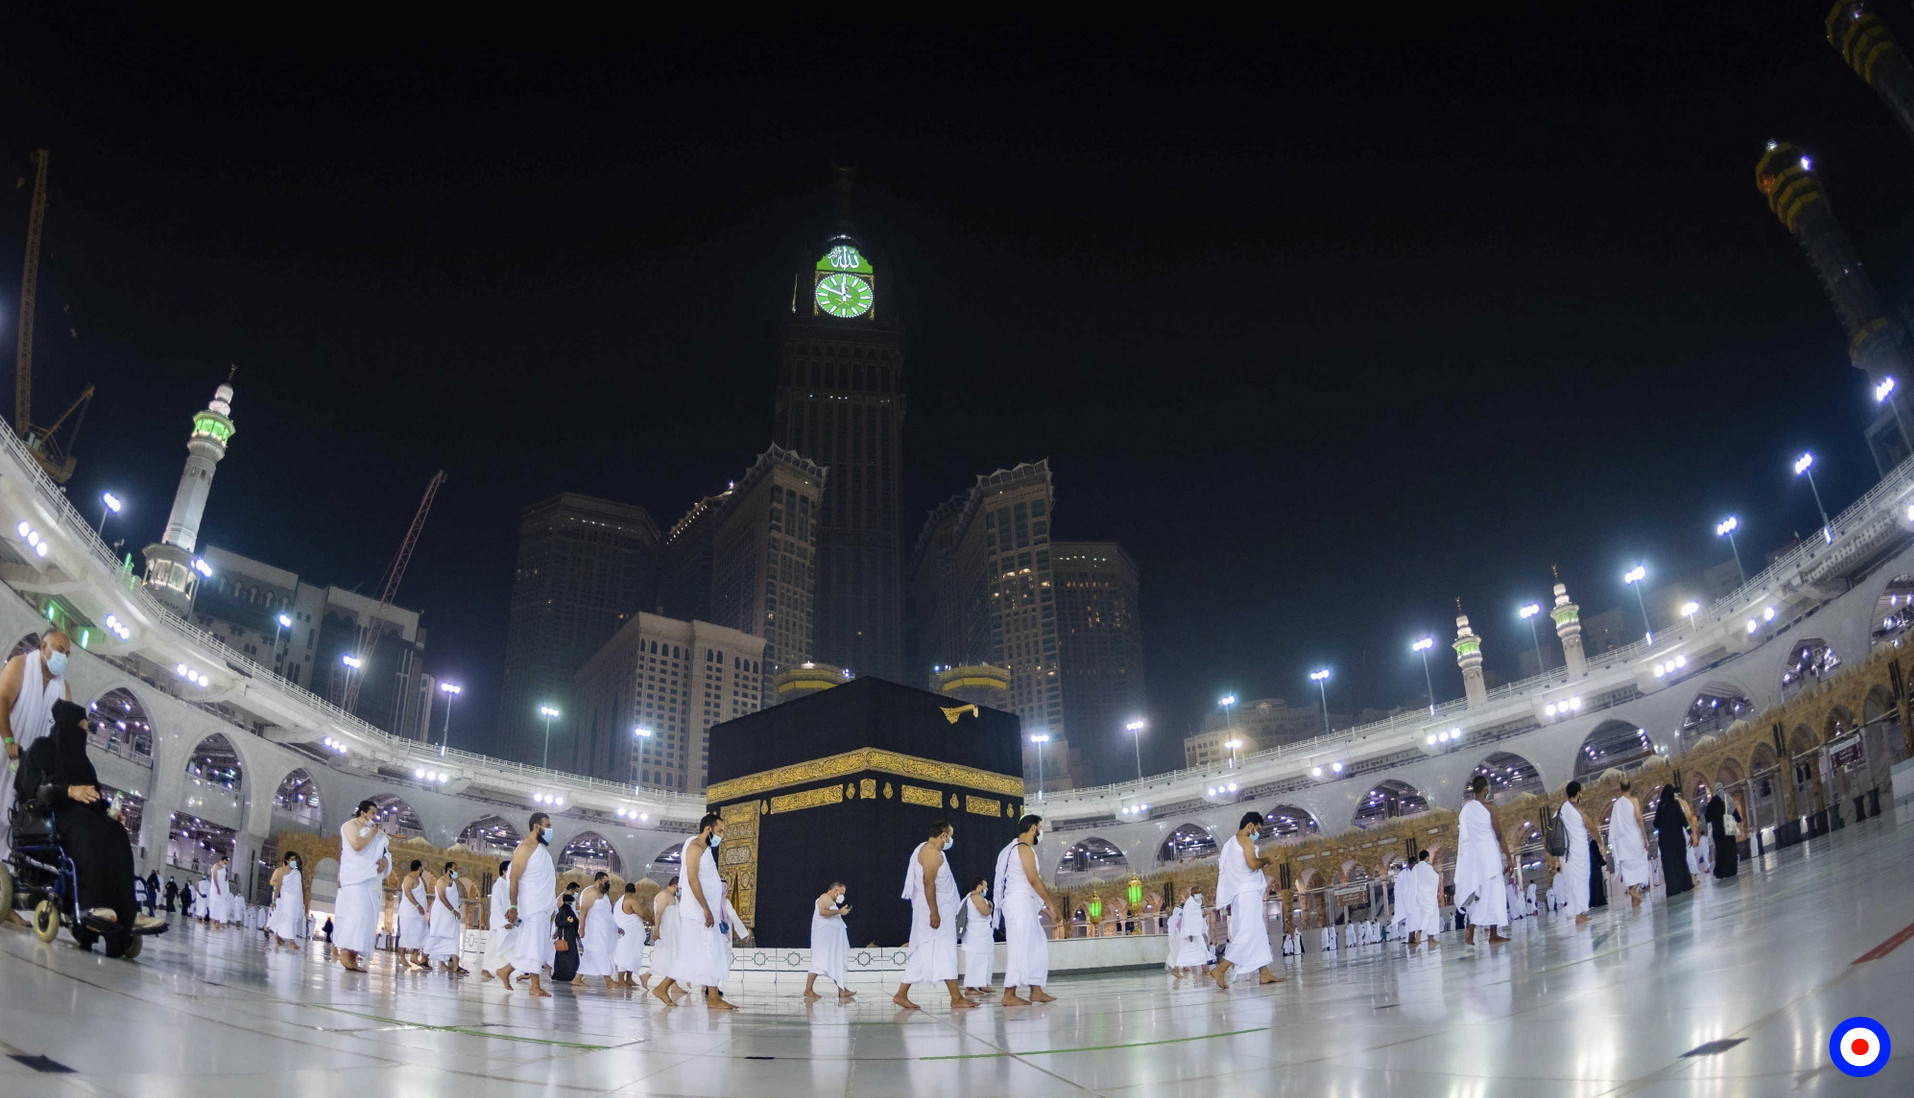 In this photo released by Saudi Ministry of Hajj and Umrah, Muslims pray around the Kaaba, the cubic building at the Grand Mosque, during the first day of Umrah in the Muslim holy city of Mecca, Saudi Arabia, Sunday, Oct. 4, 2020. A very small, limited number of people donning the white terrycloth garment symbolic of the Muslim pilgrimage circled Islam's holiest site in Mecca on Sunday after Saudi Arabia lifted coronavirus restrictions that had been in place for months. (Saudi Ministry of Hajj and Umrah via AP)